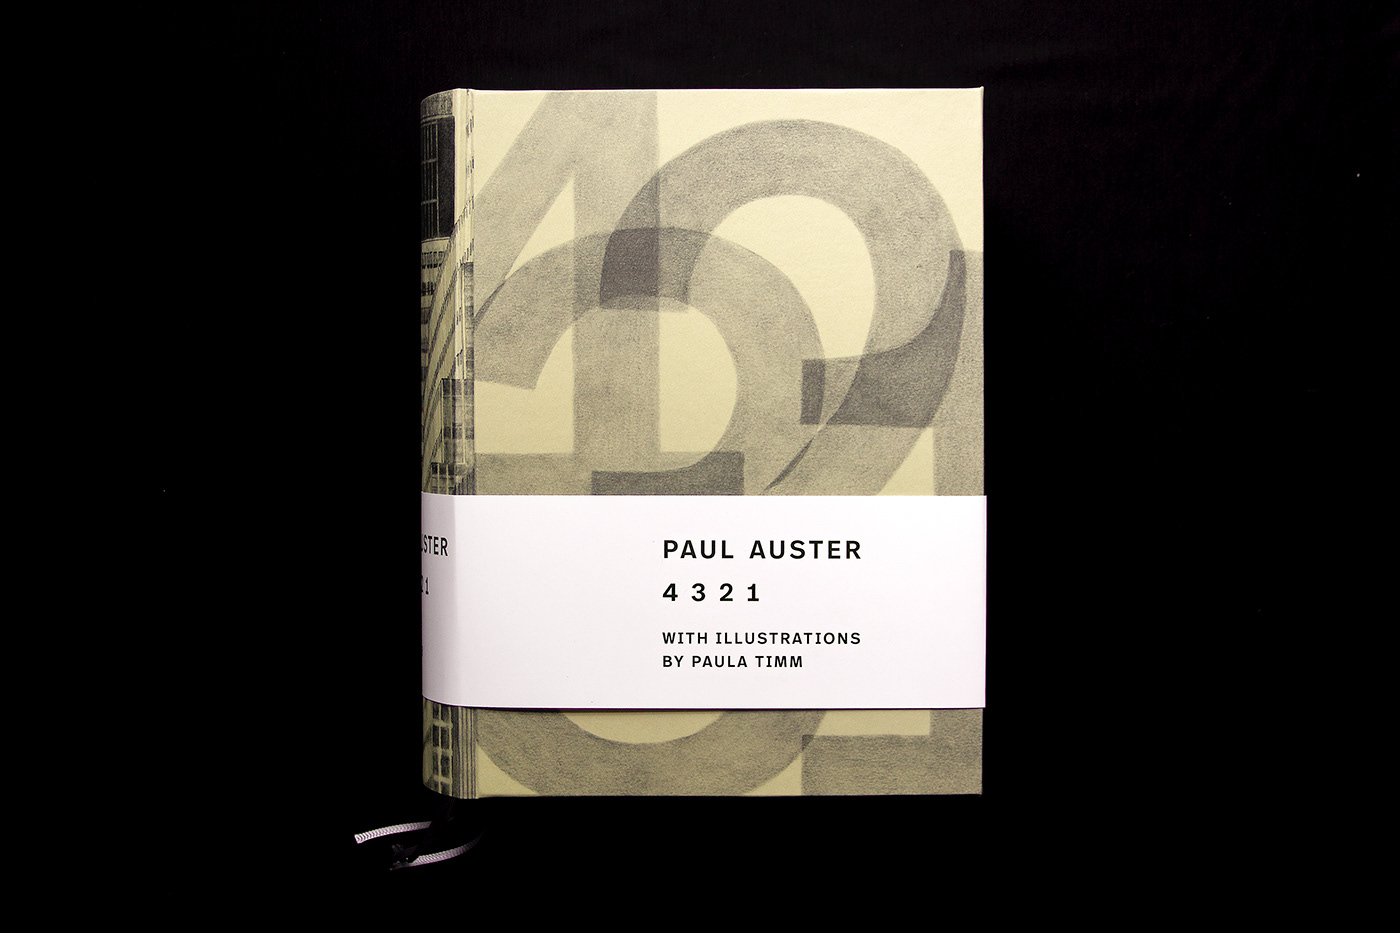 Paul Auster Muthesius kunsthockschule parallel universe bachelor literature storytelling   thesis Drawing  editorial design  New York